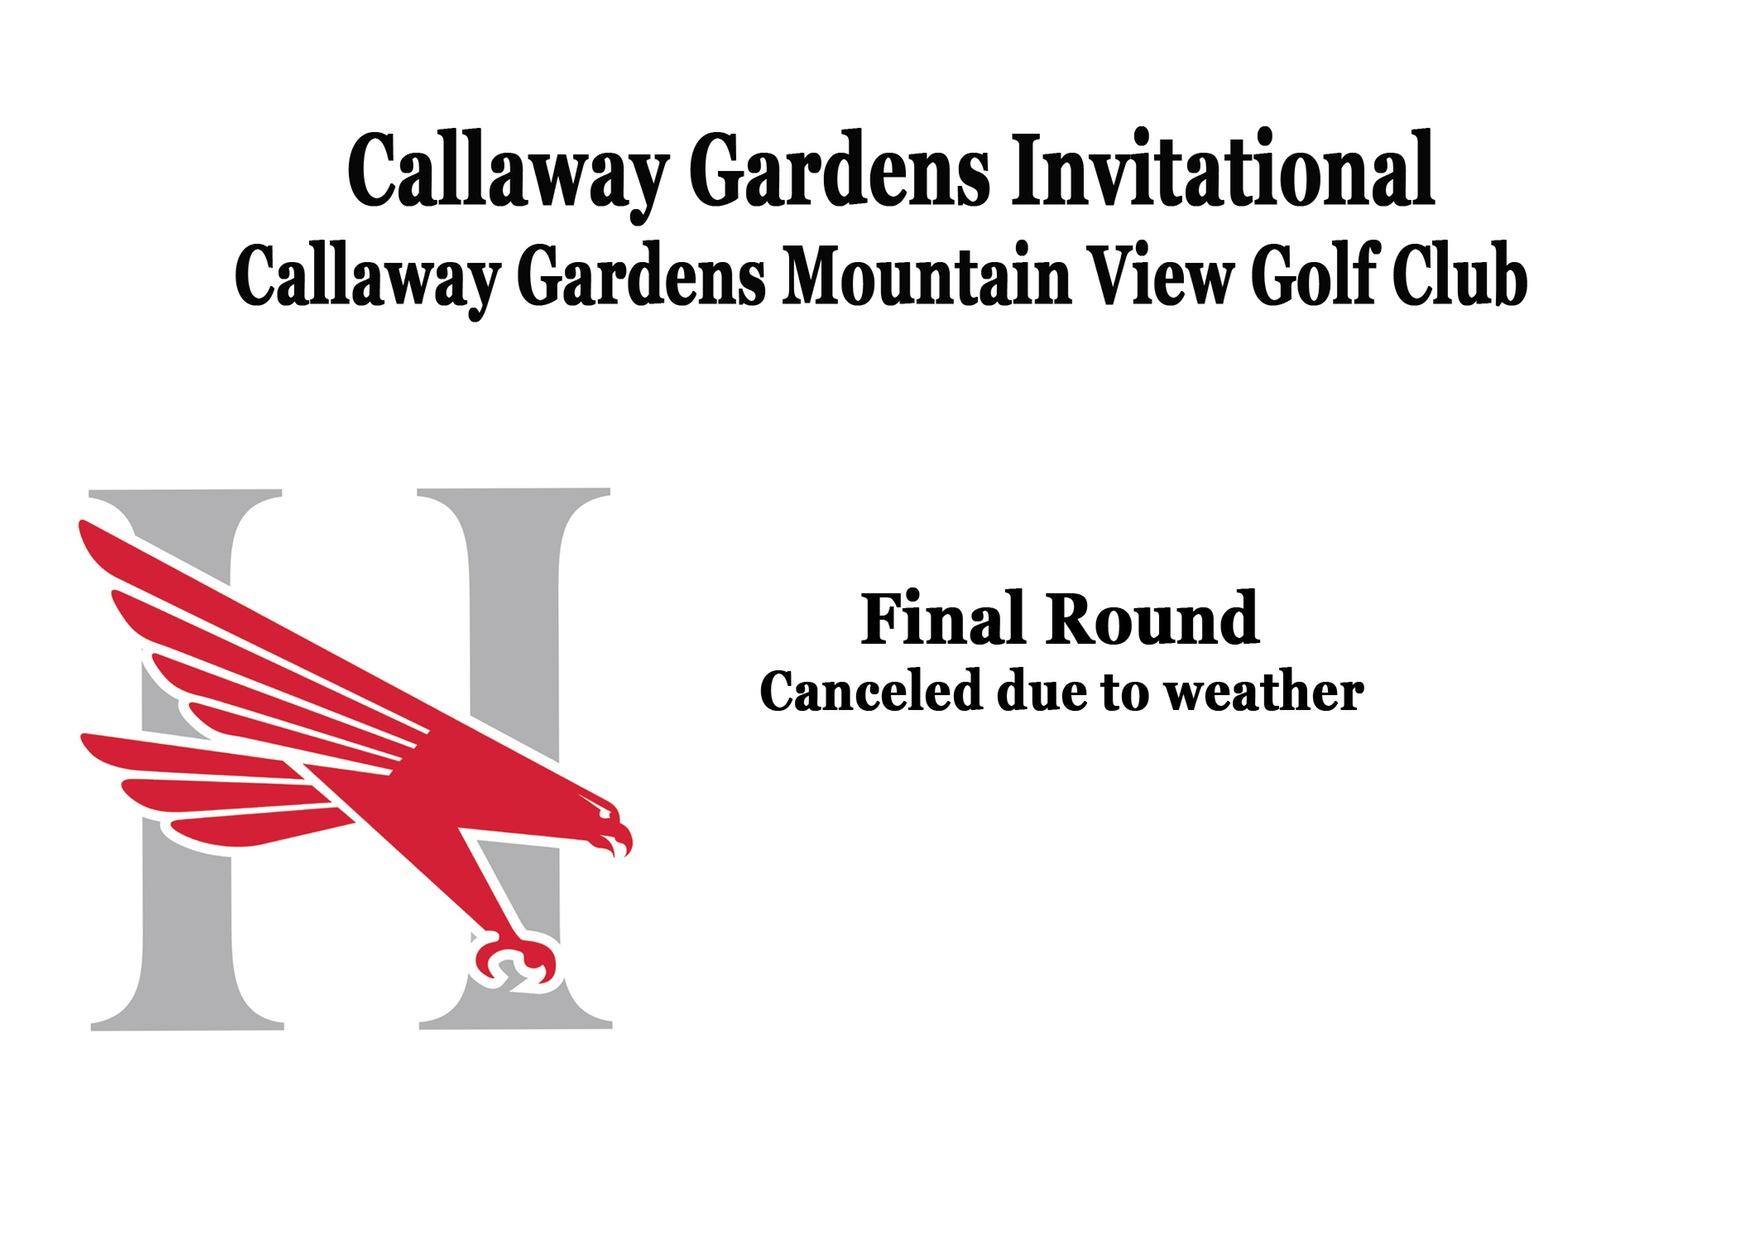 Weather cancels final round of Callaway Gardens Invitational